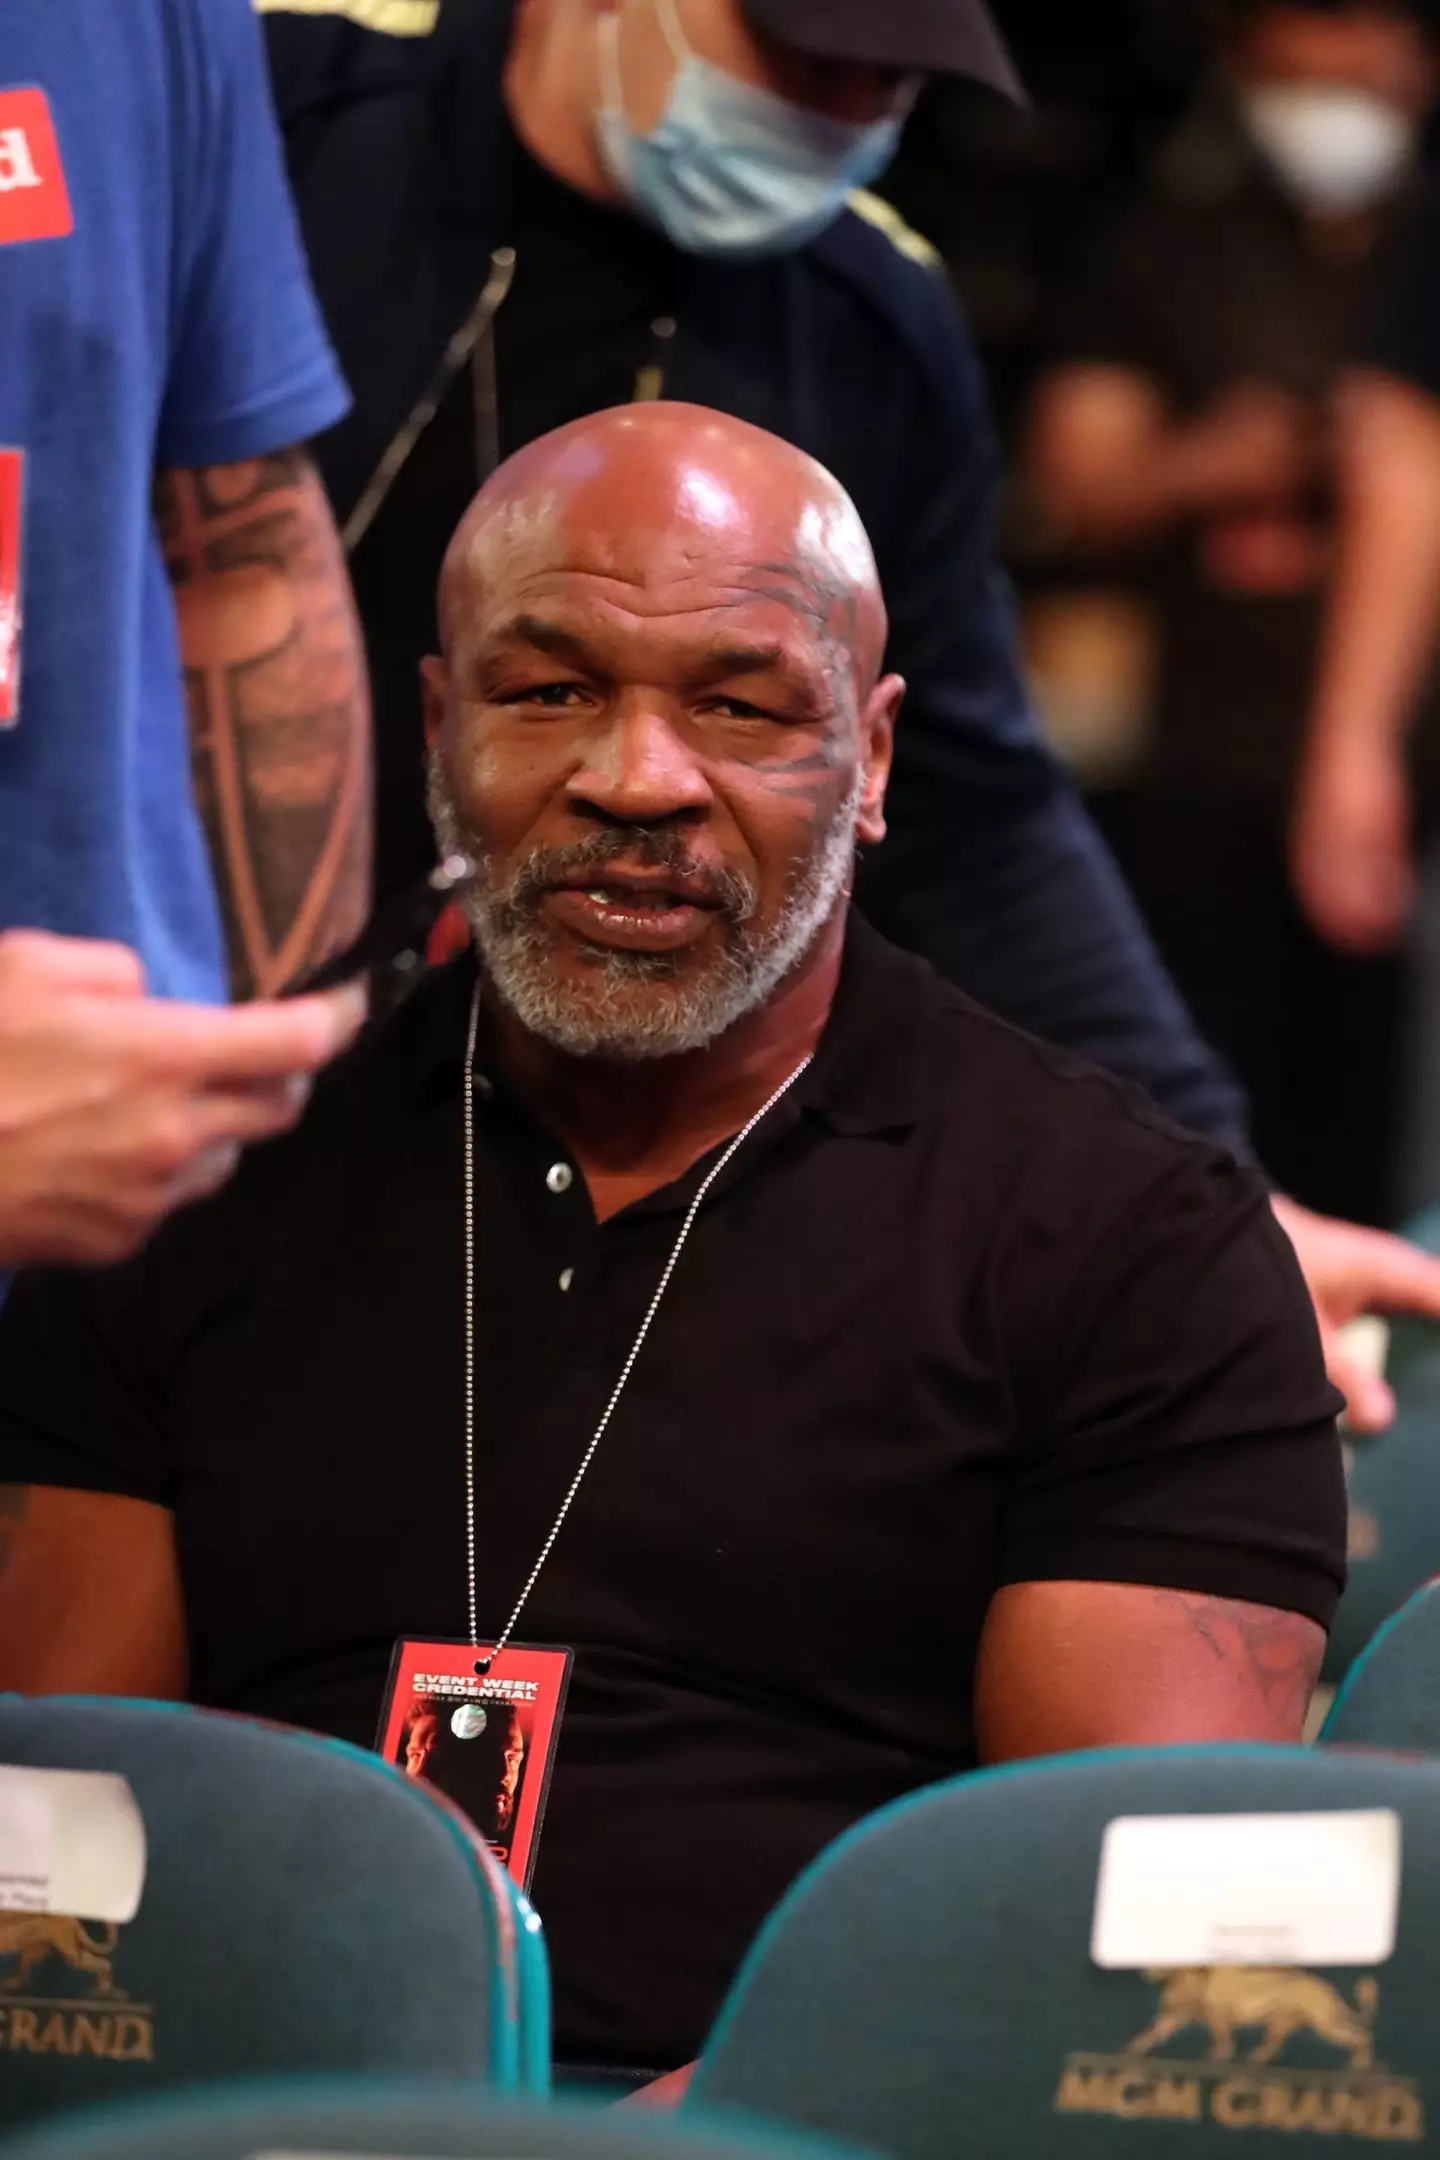 Mike Tyson spends $40,000 a month on weed.